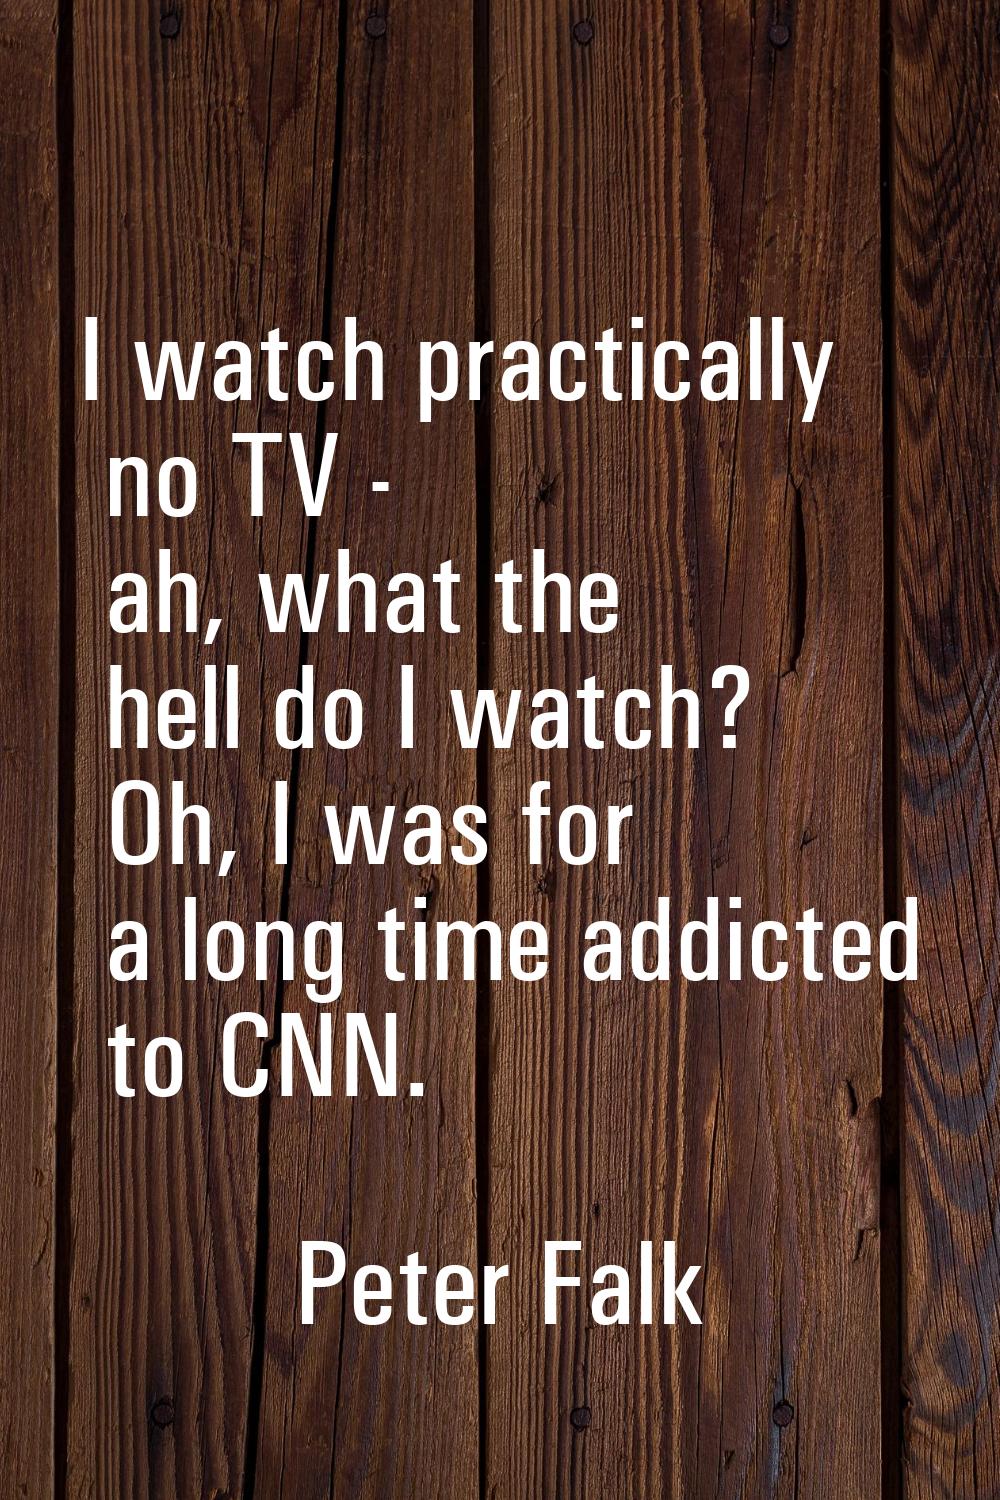 I watch practically no TV - ah, what the hell do I watch? Oh, I was for a long time addicted to CNN